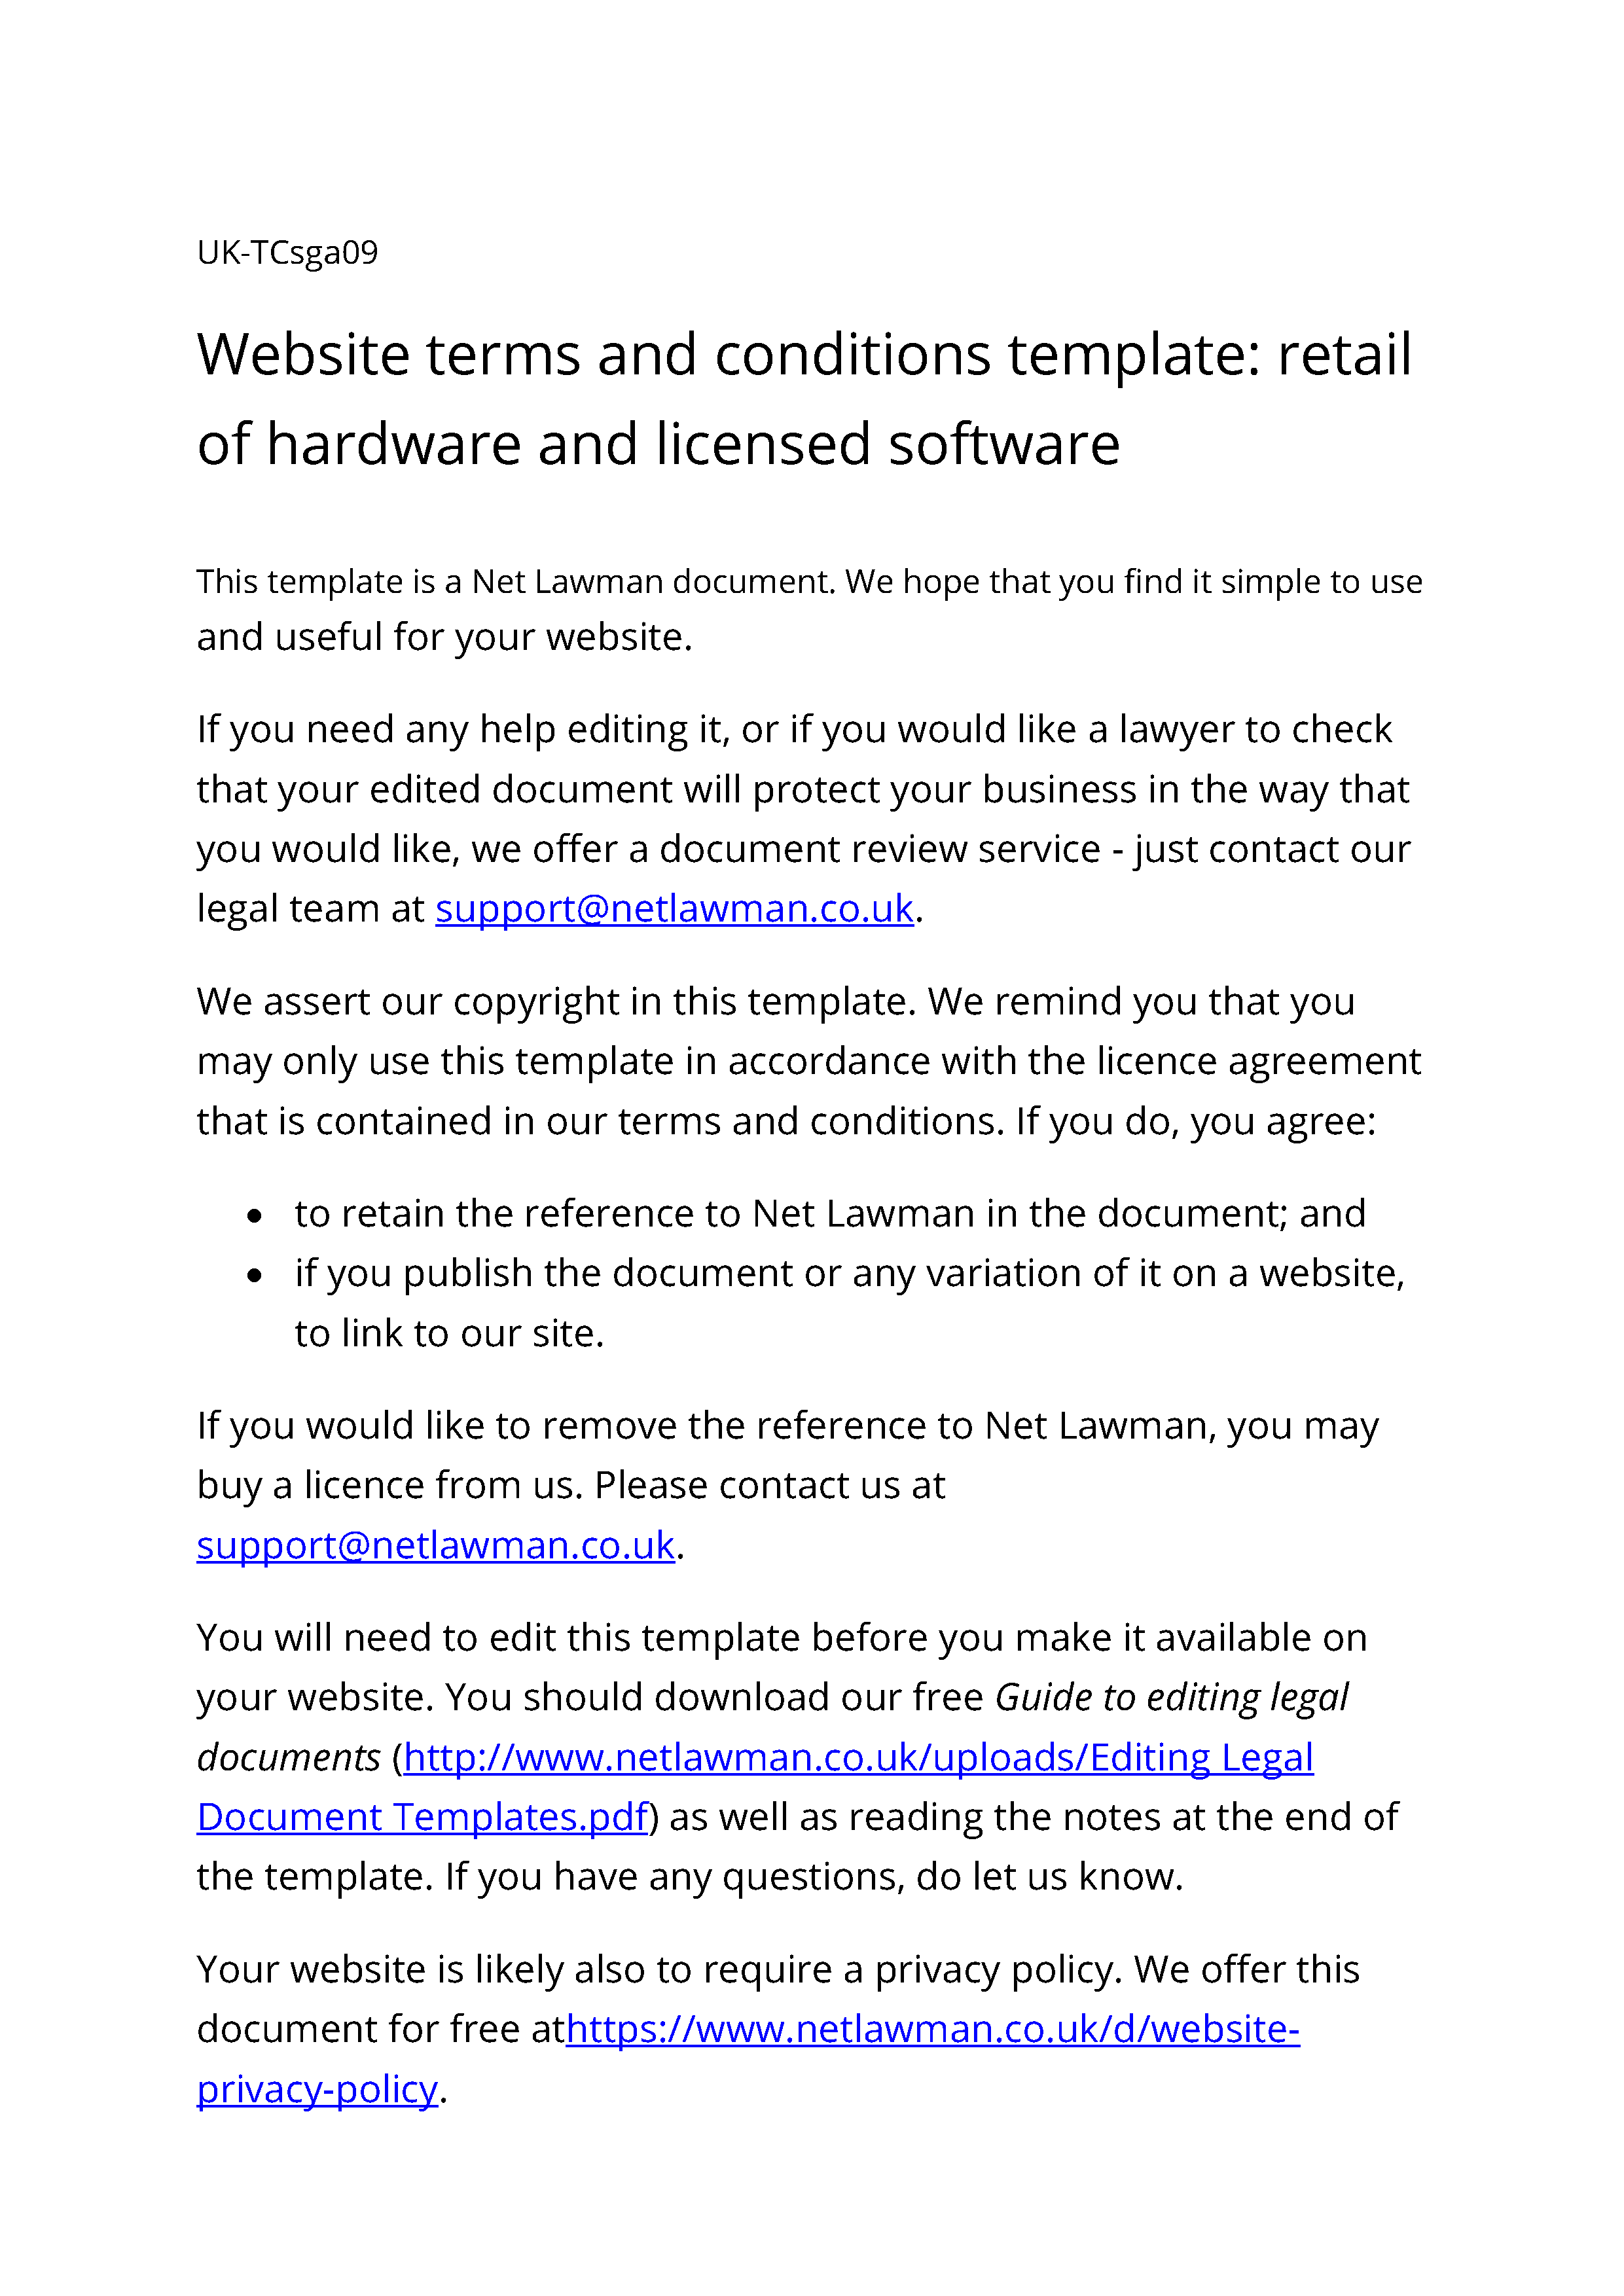 Sample page from the website terms for a hardware and licensed software retailer